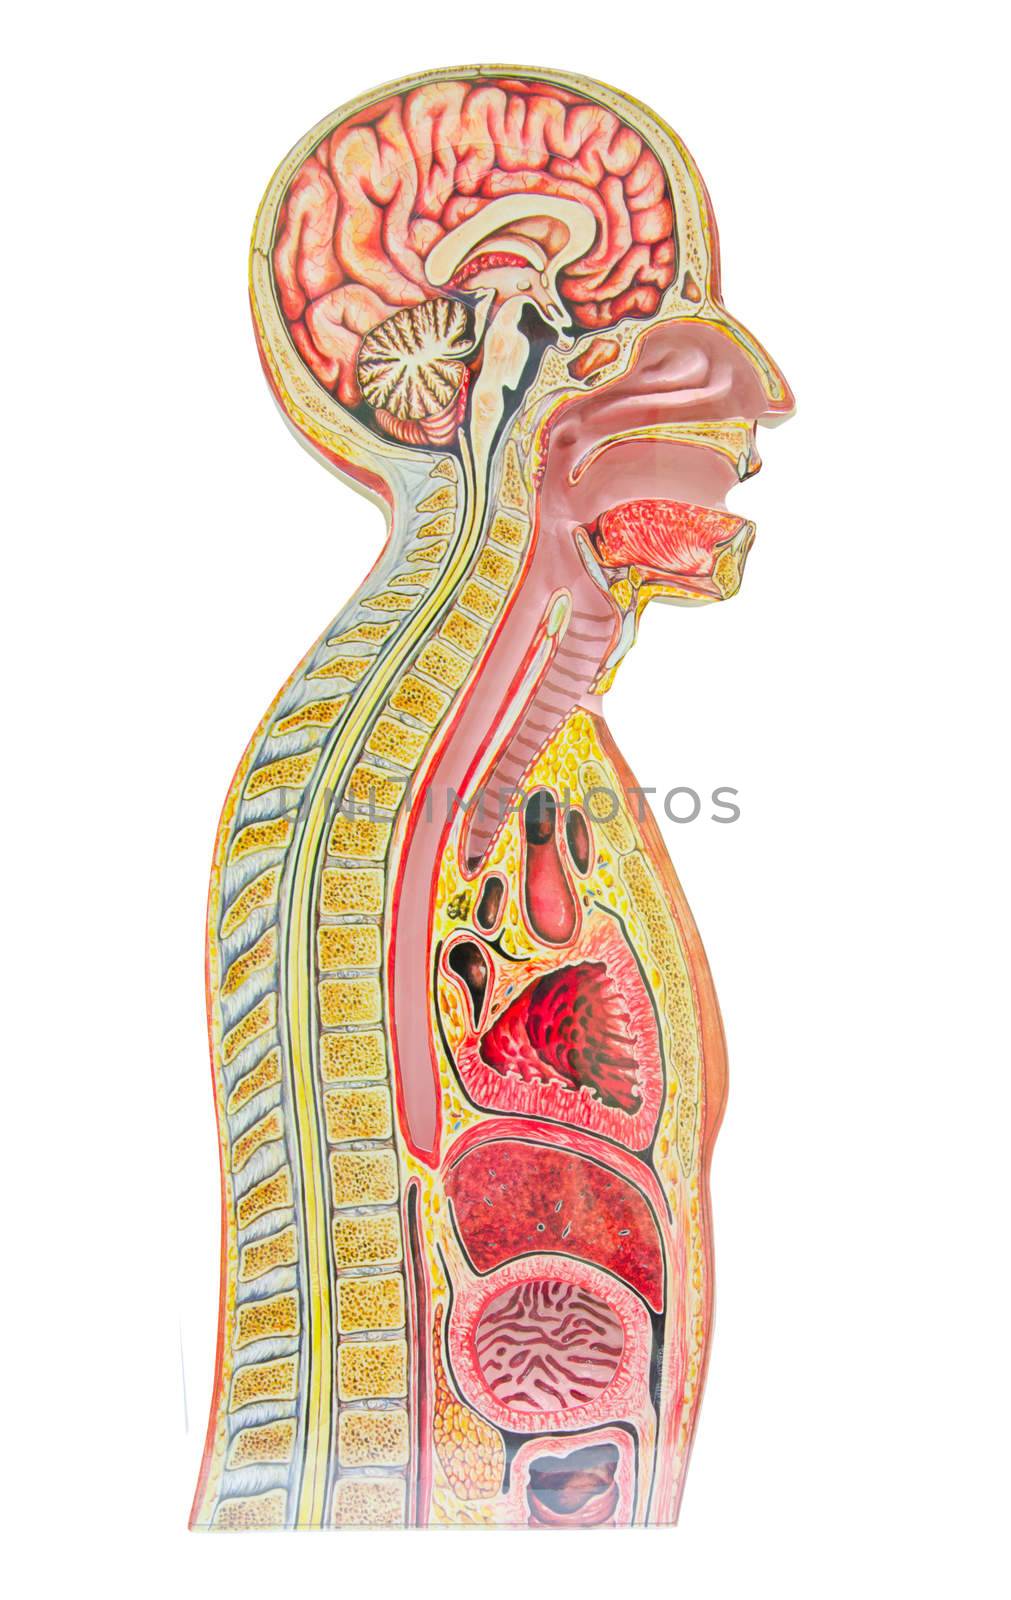 Human anatomical model isolated against a white background an often used tool for medical study.